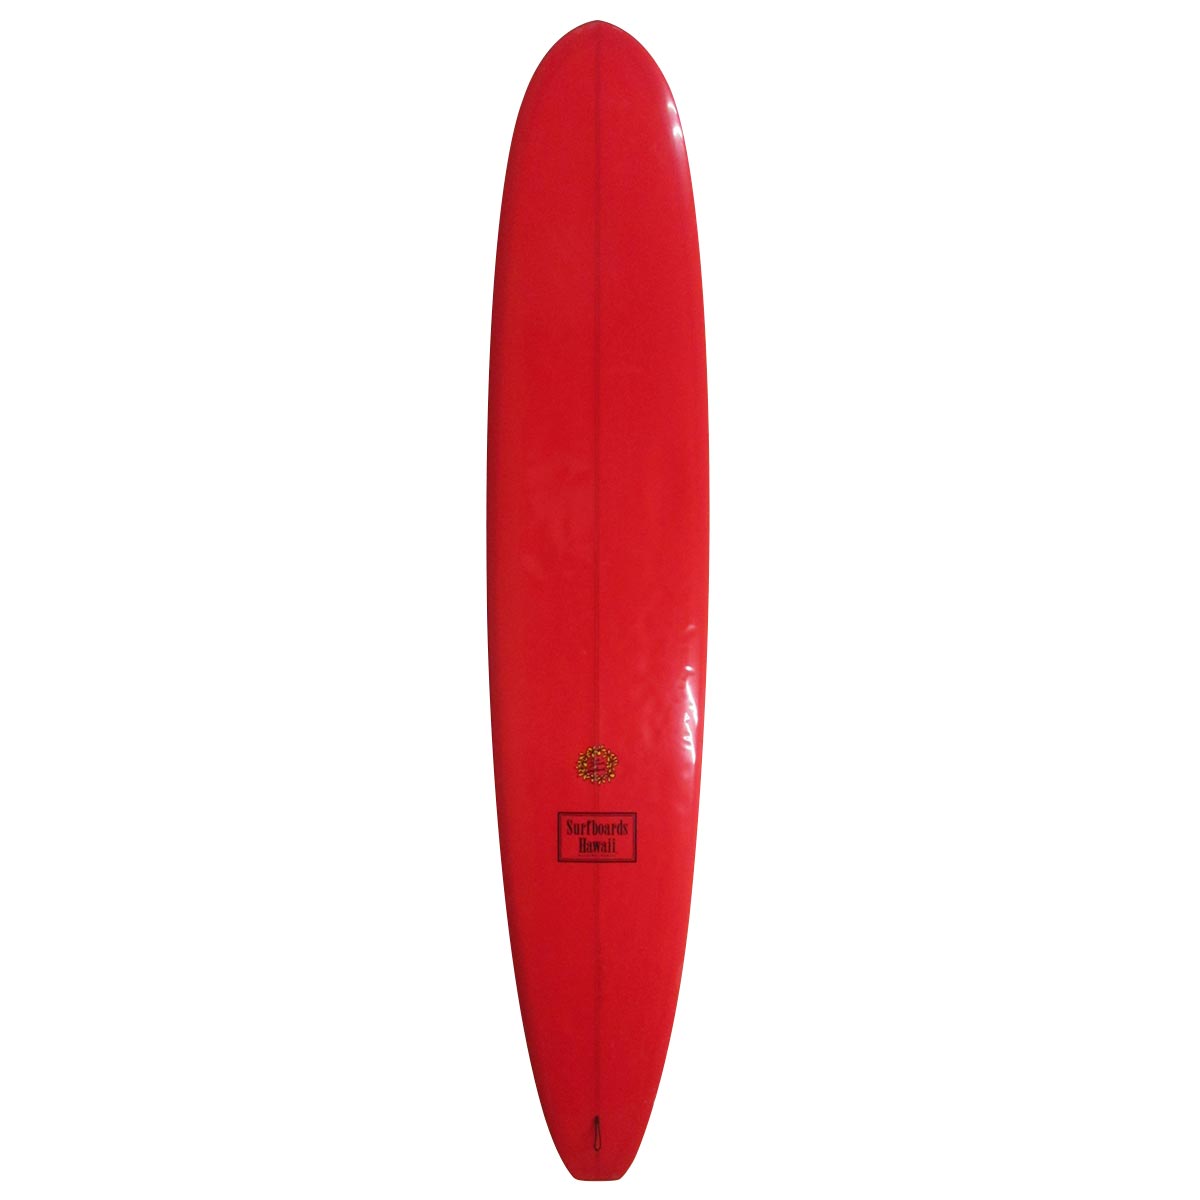  / SURFBOARD HAWAII / All ROUND 9`6 Shaped By Dick Brewer